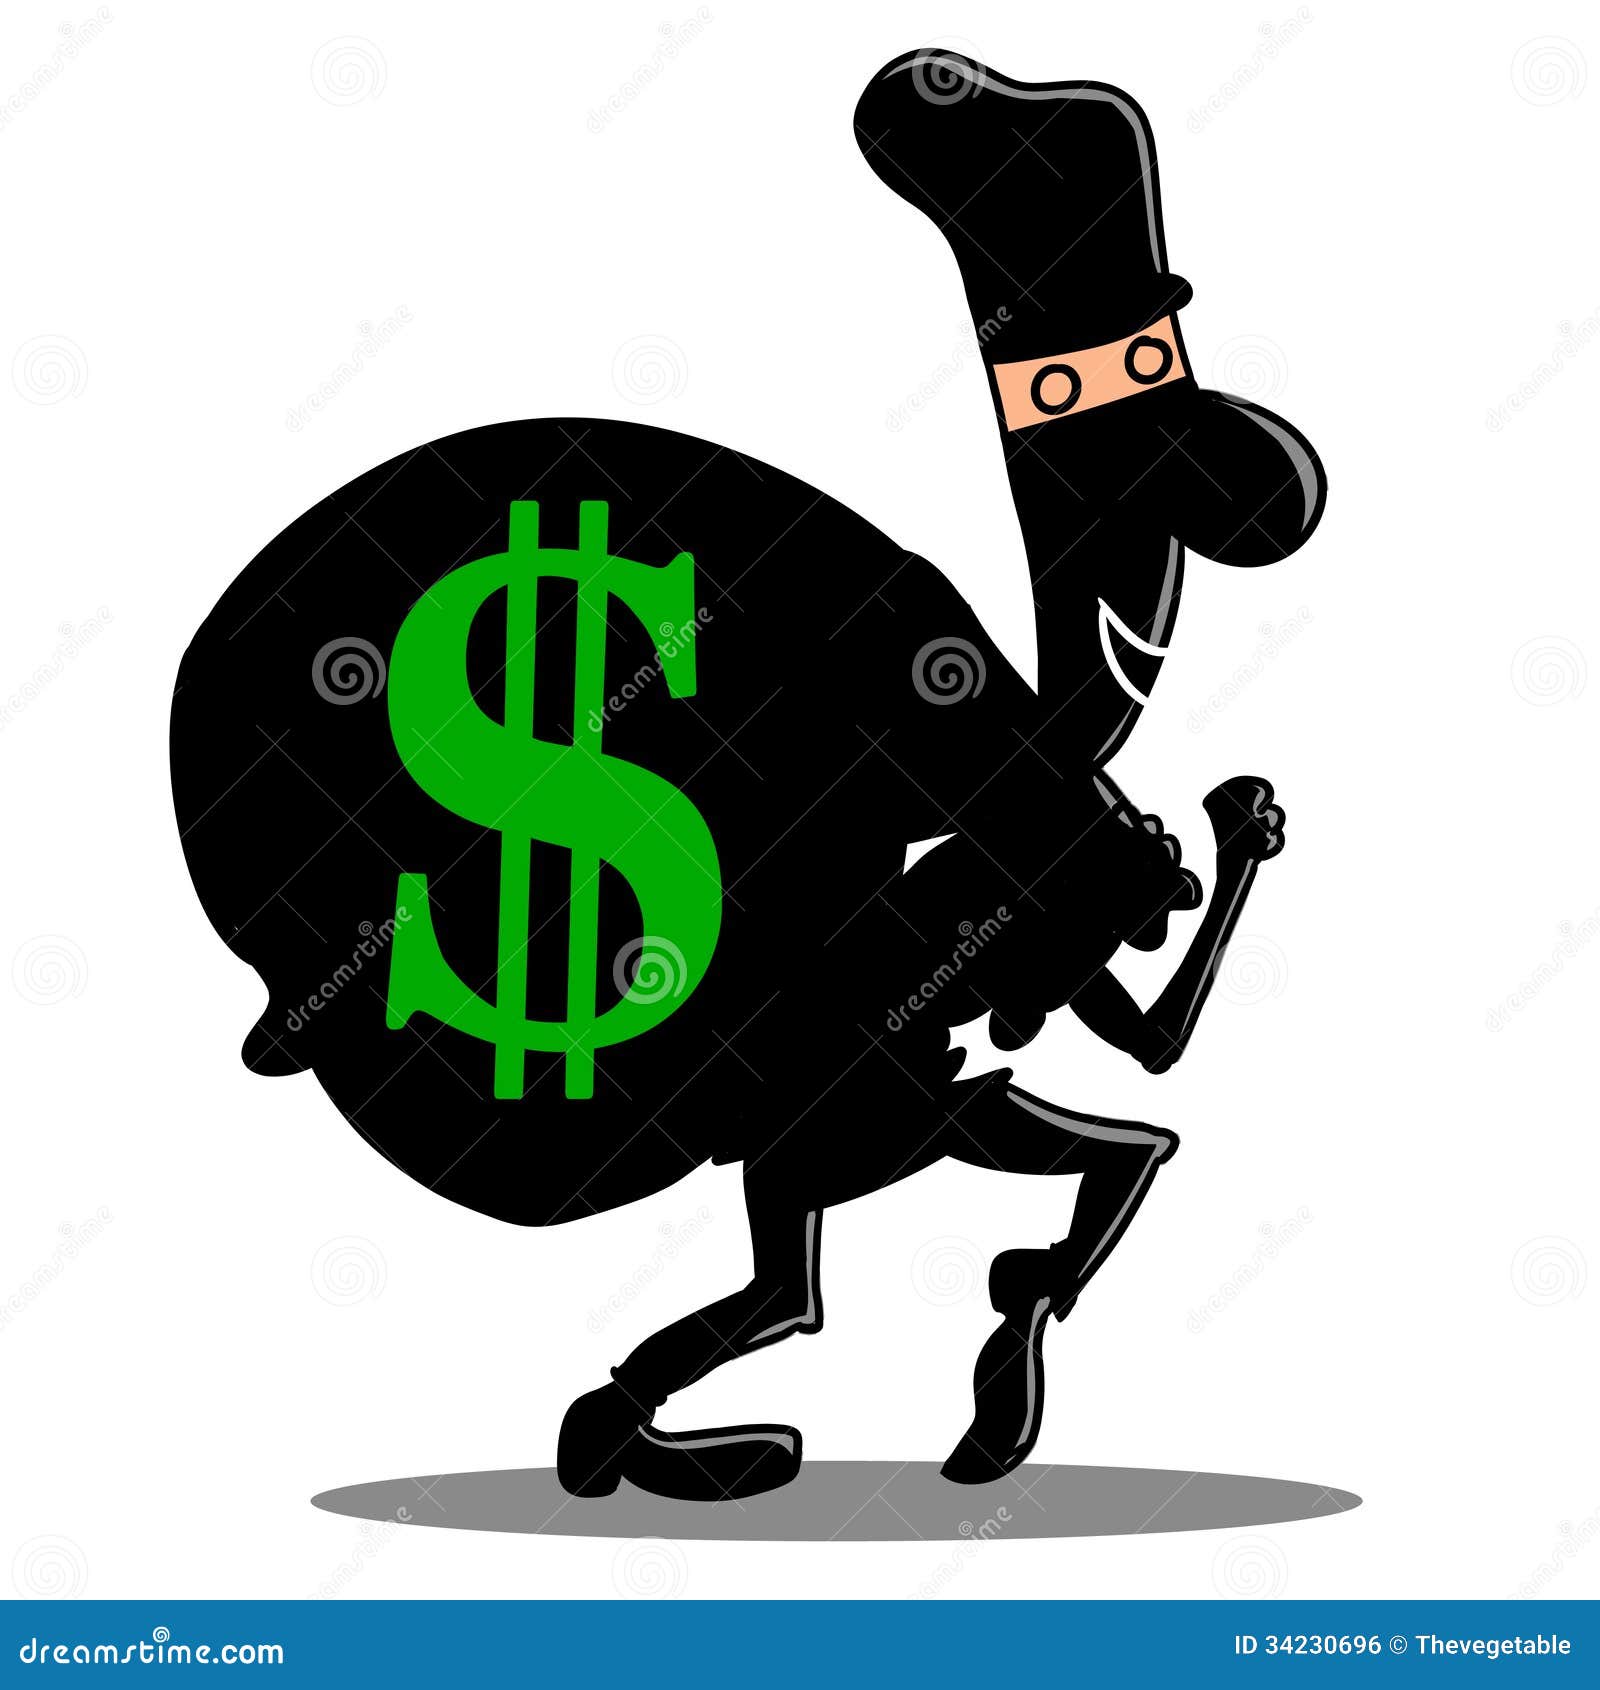 Steal Money Siluet Royalty Free Stock Image - Image: 34230696